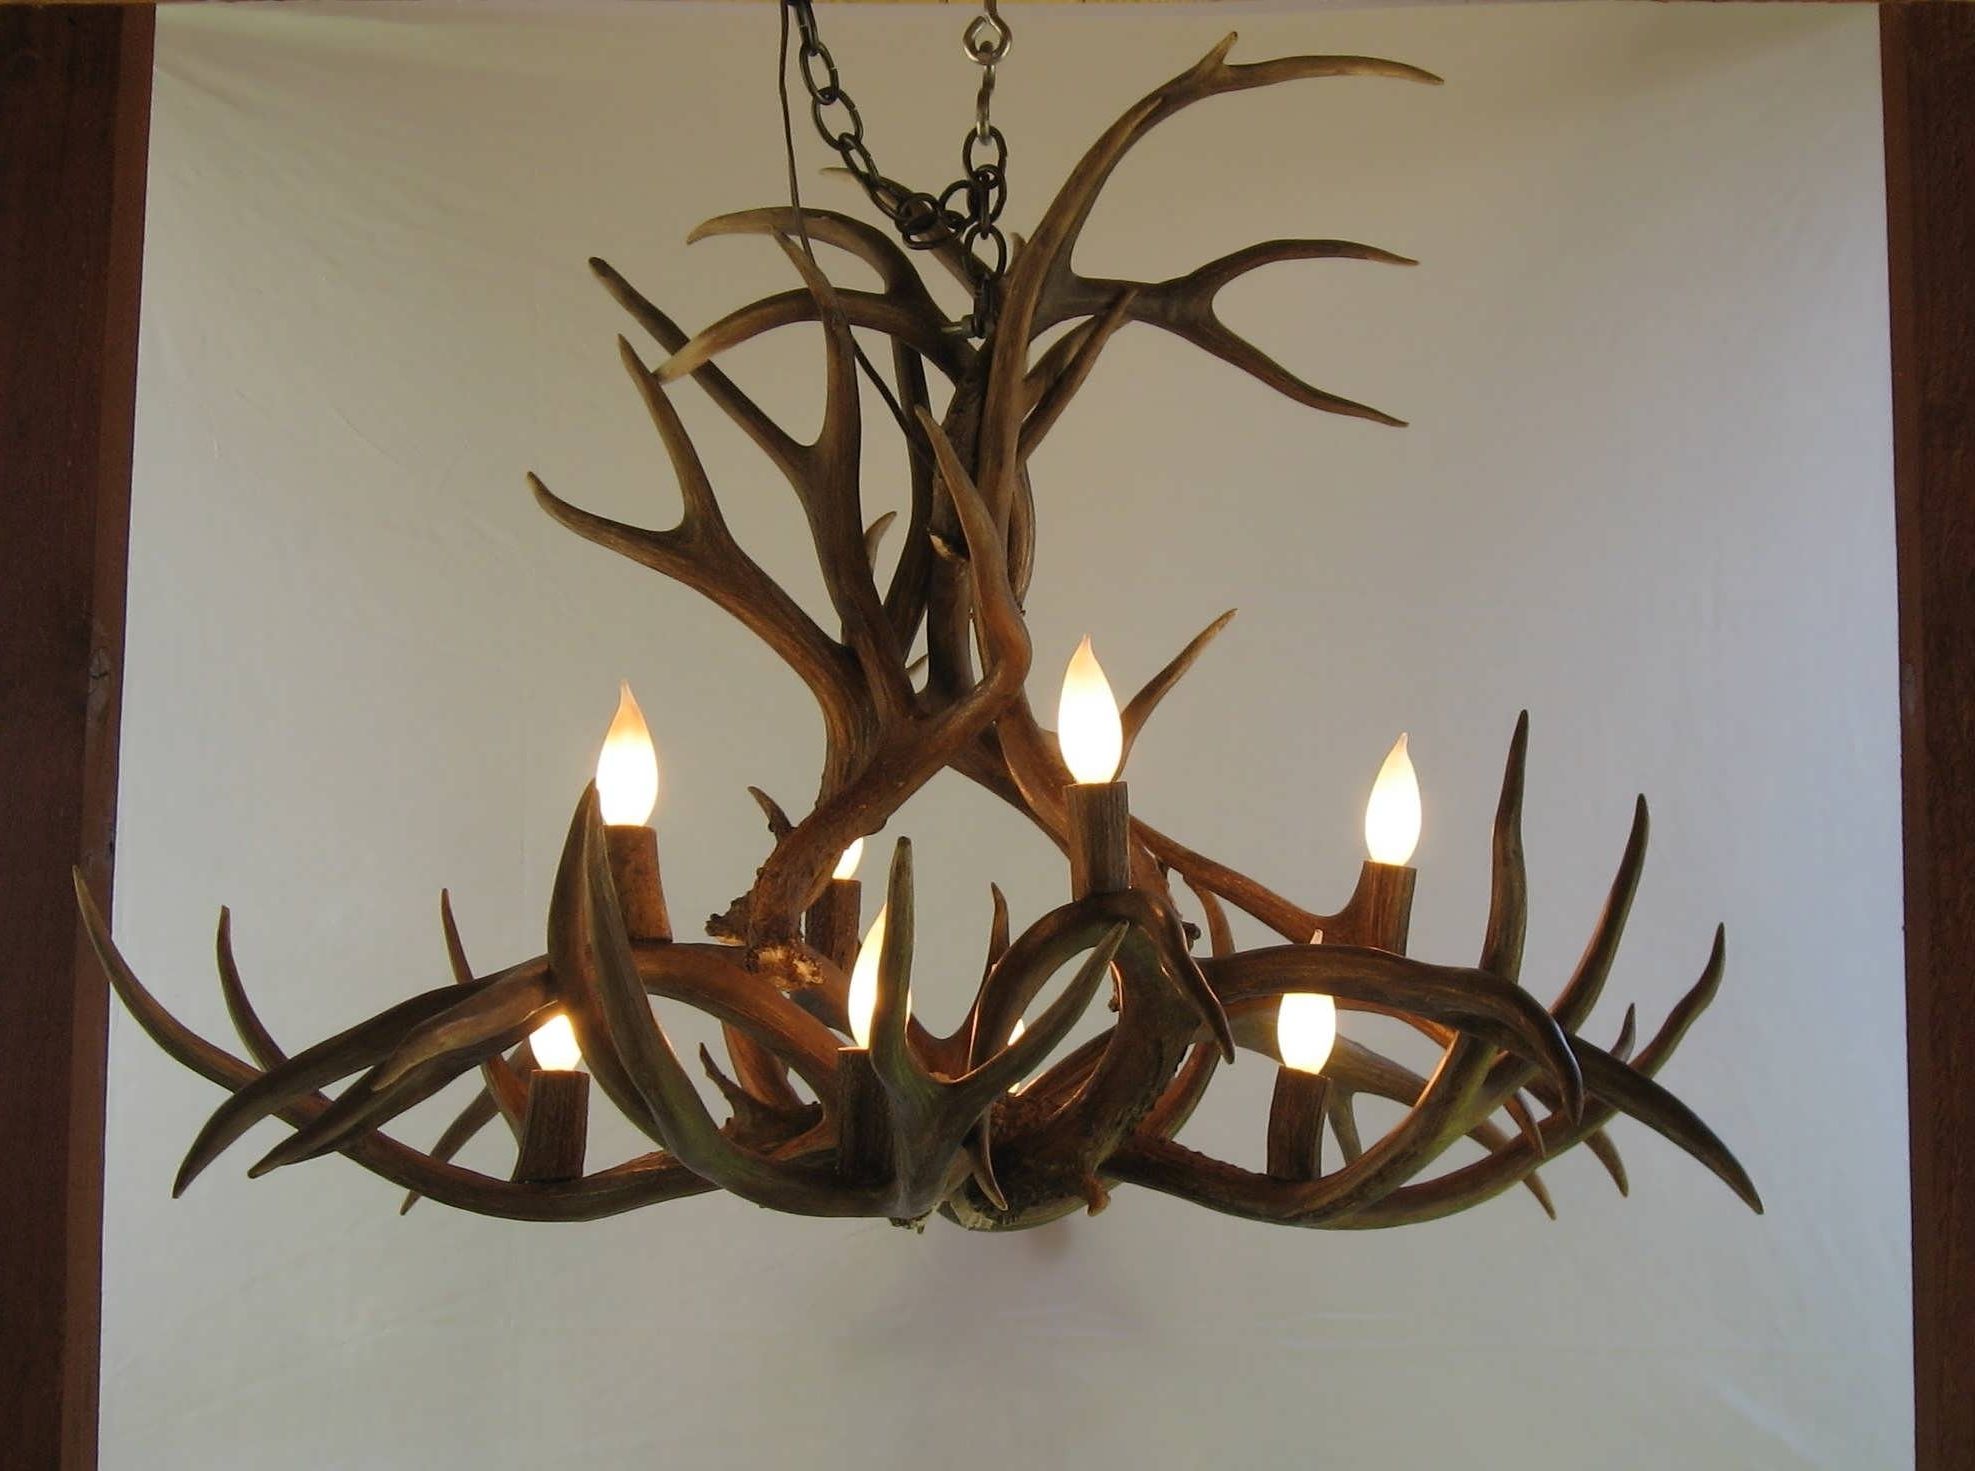 Stag Horn Chandelier For Preferred Light : Antler Light Fixtures Chandelier For Sale Elk Stag Horn (View 8 of 20)